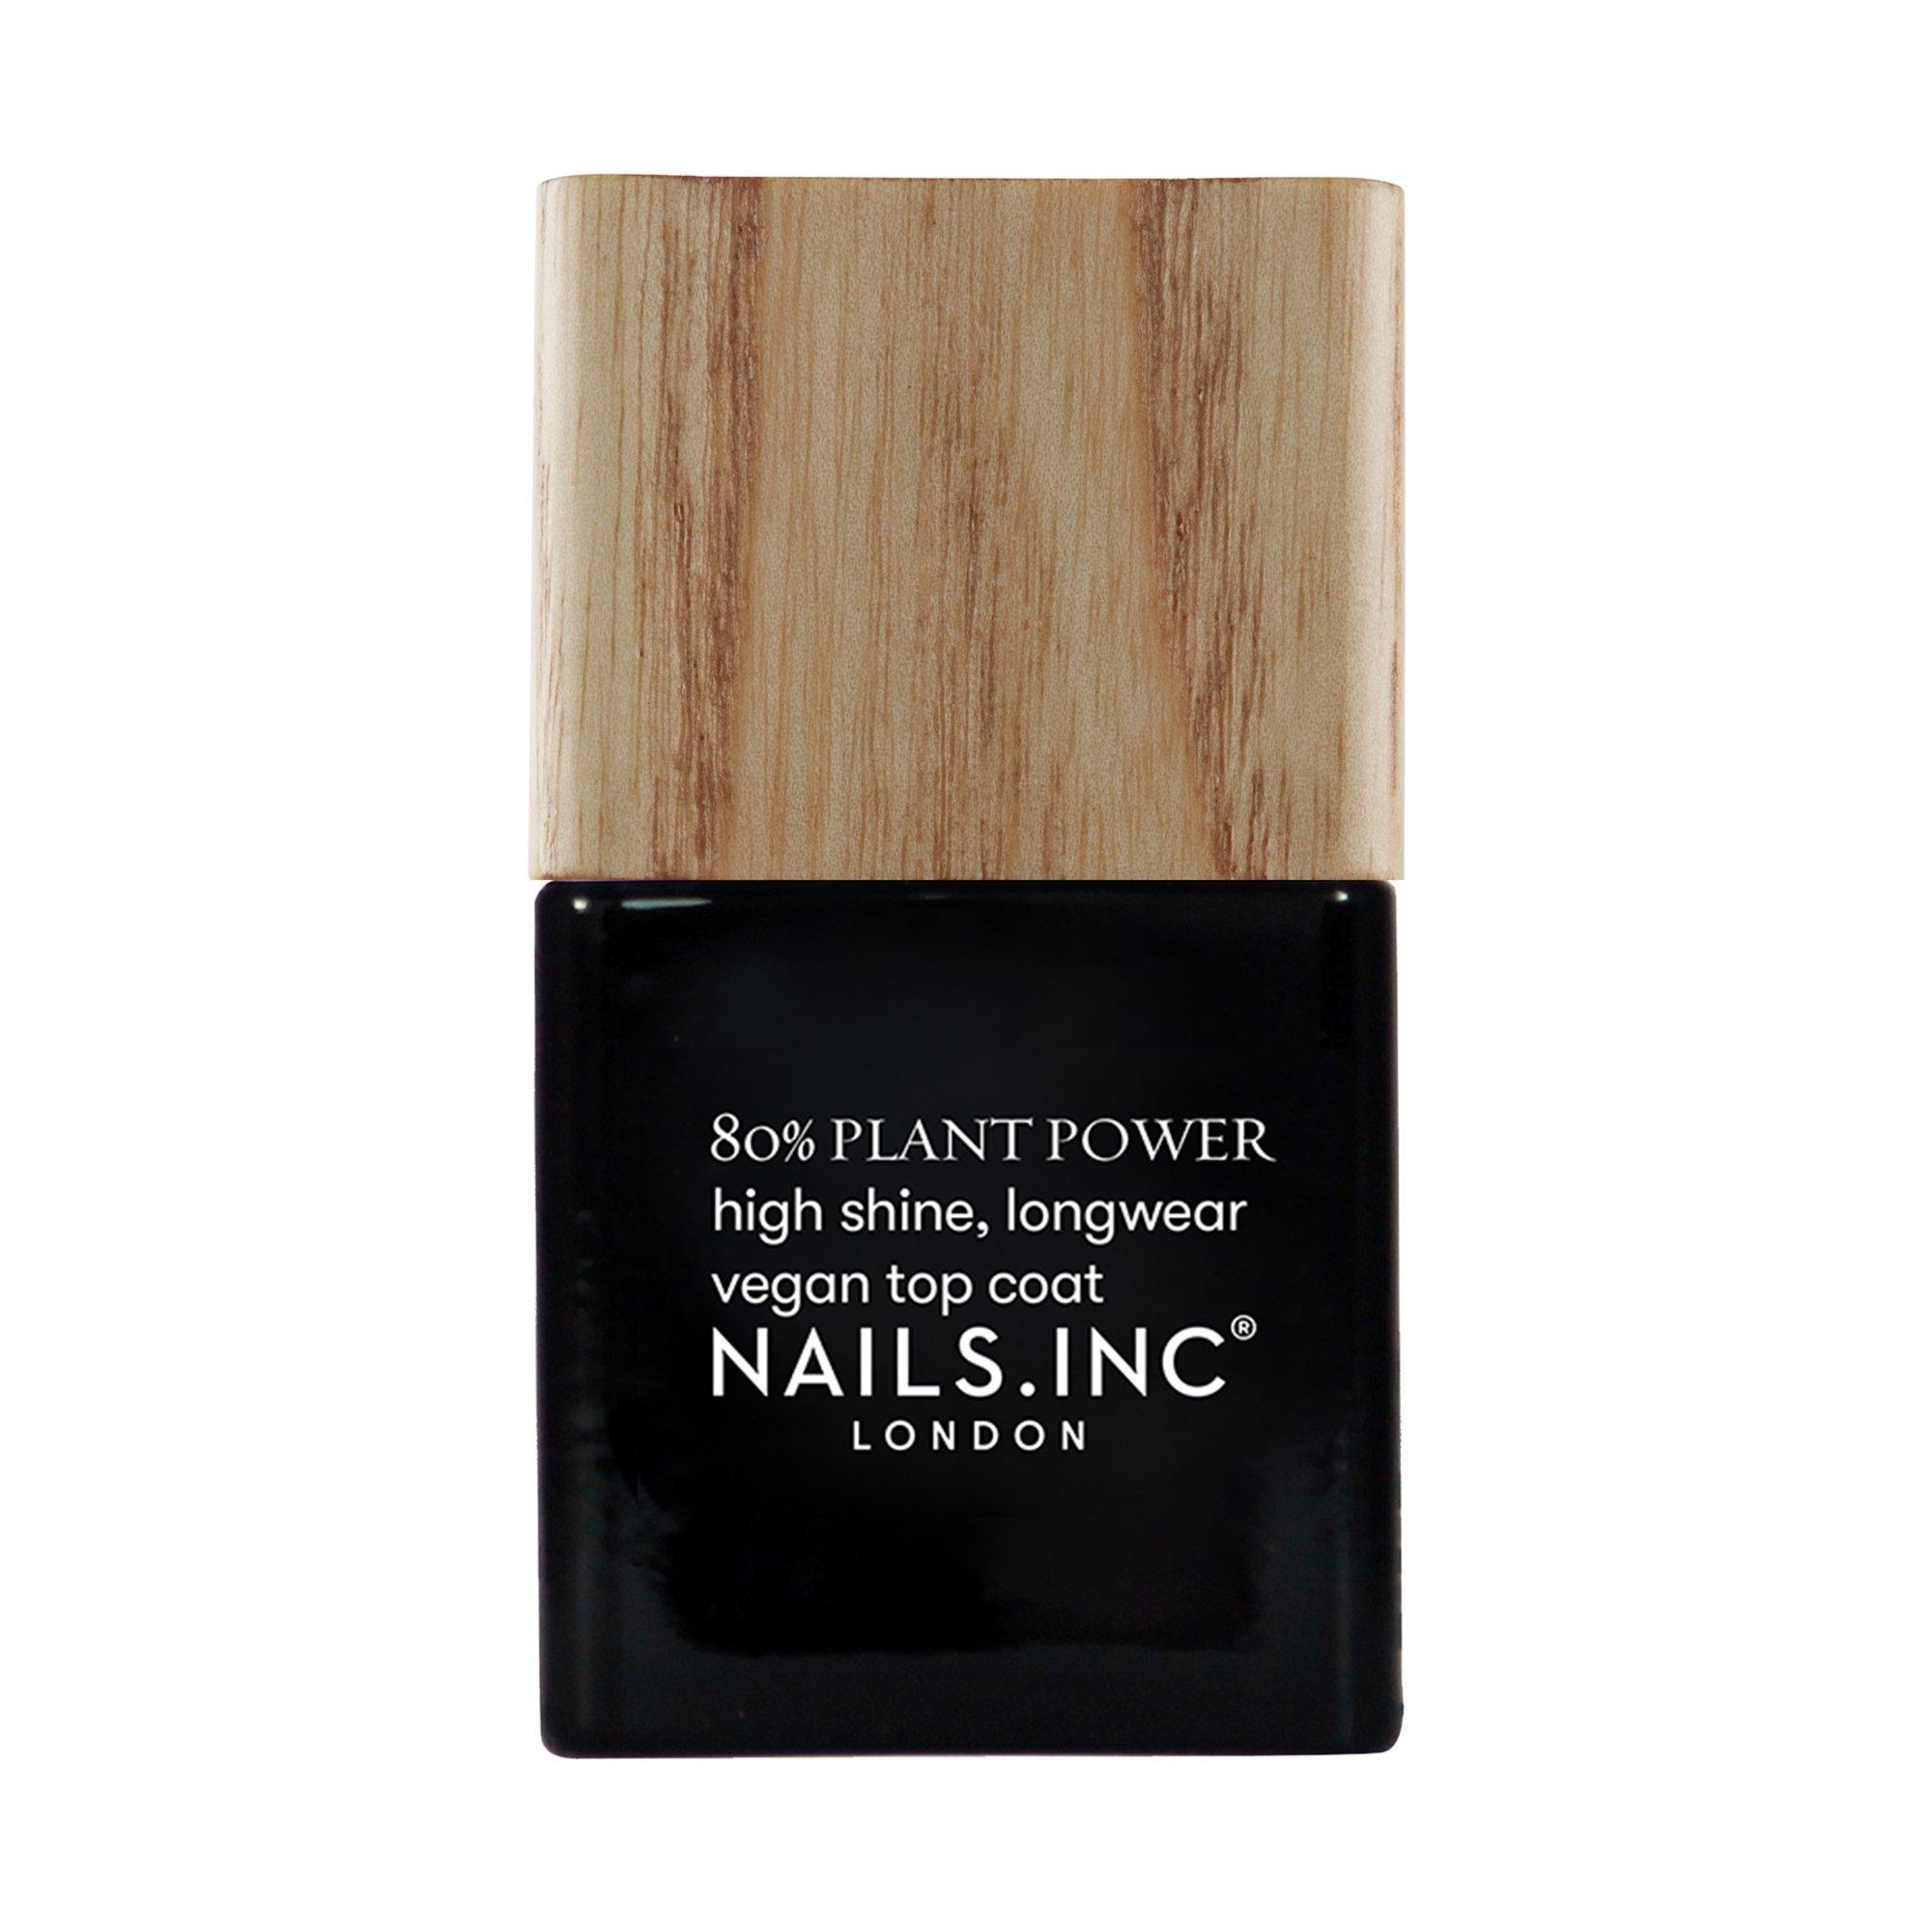 Image of Nails Inc. 80% Plant Power Top Coat